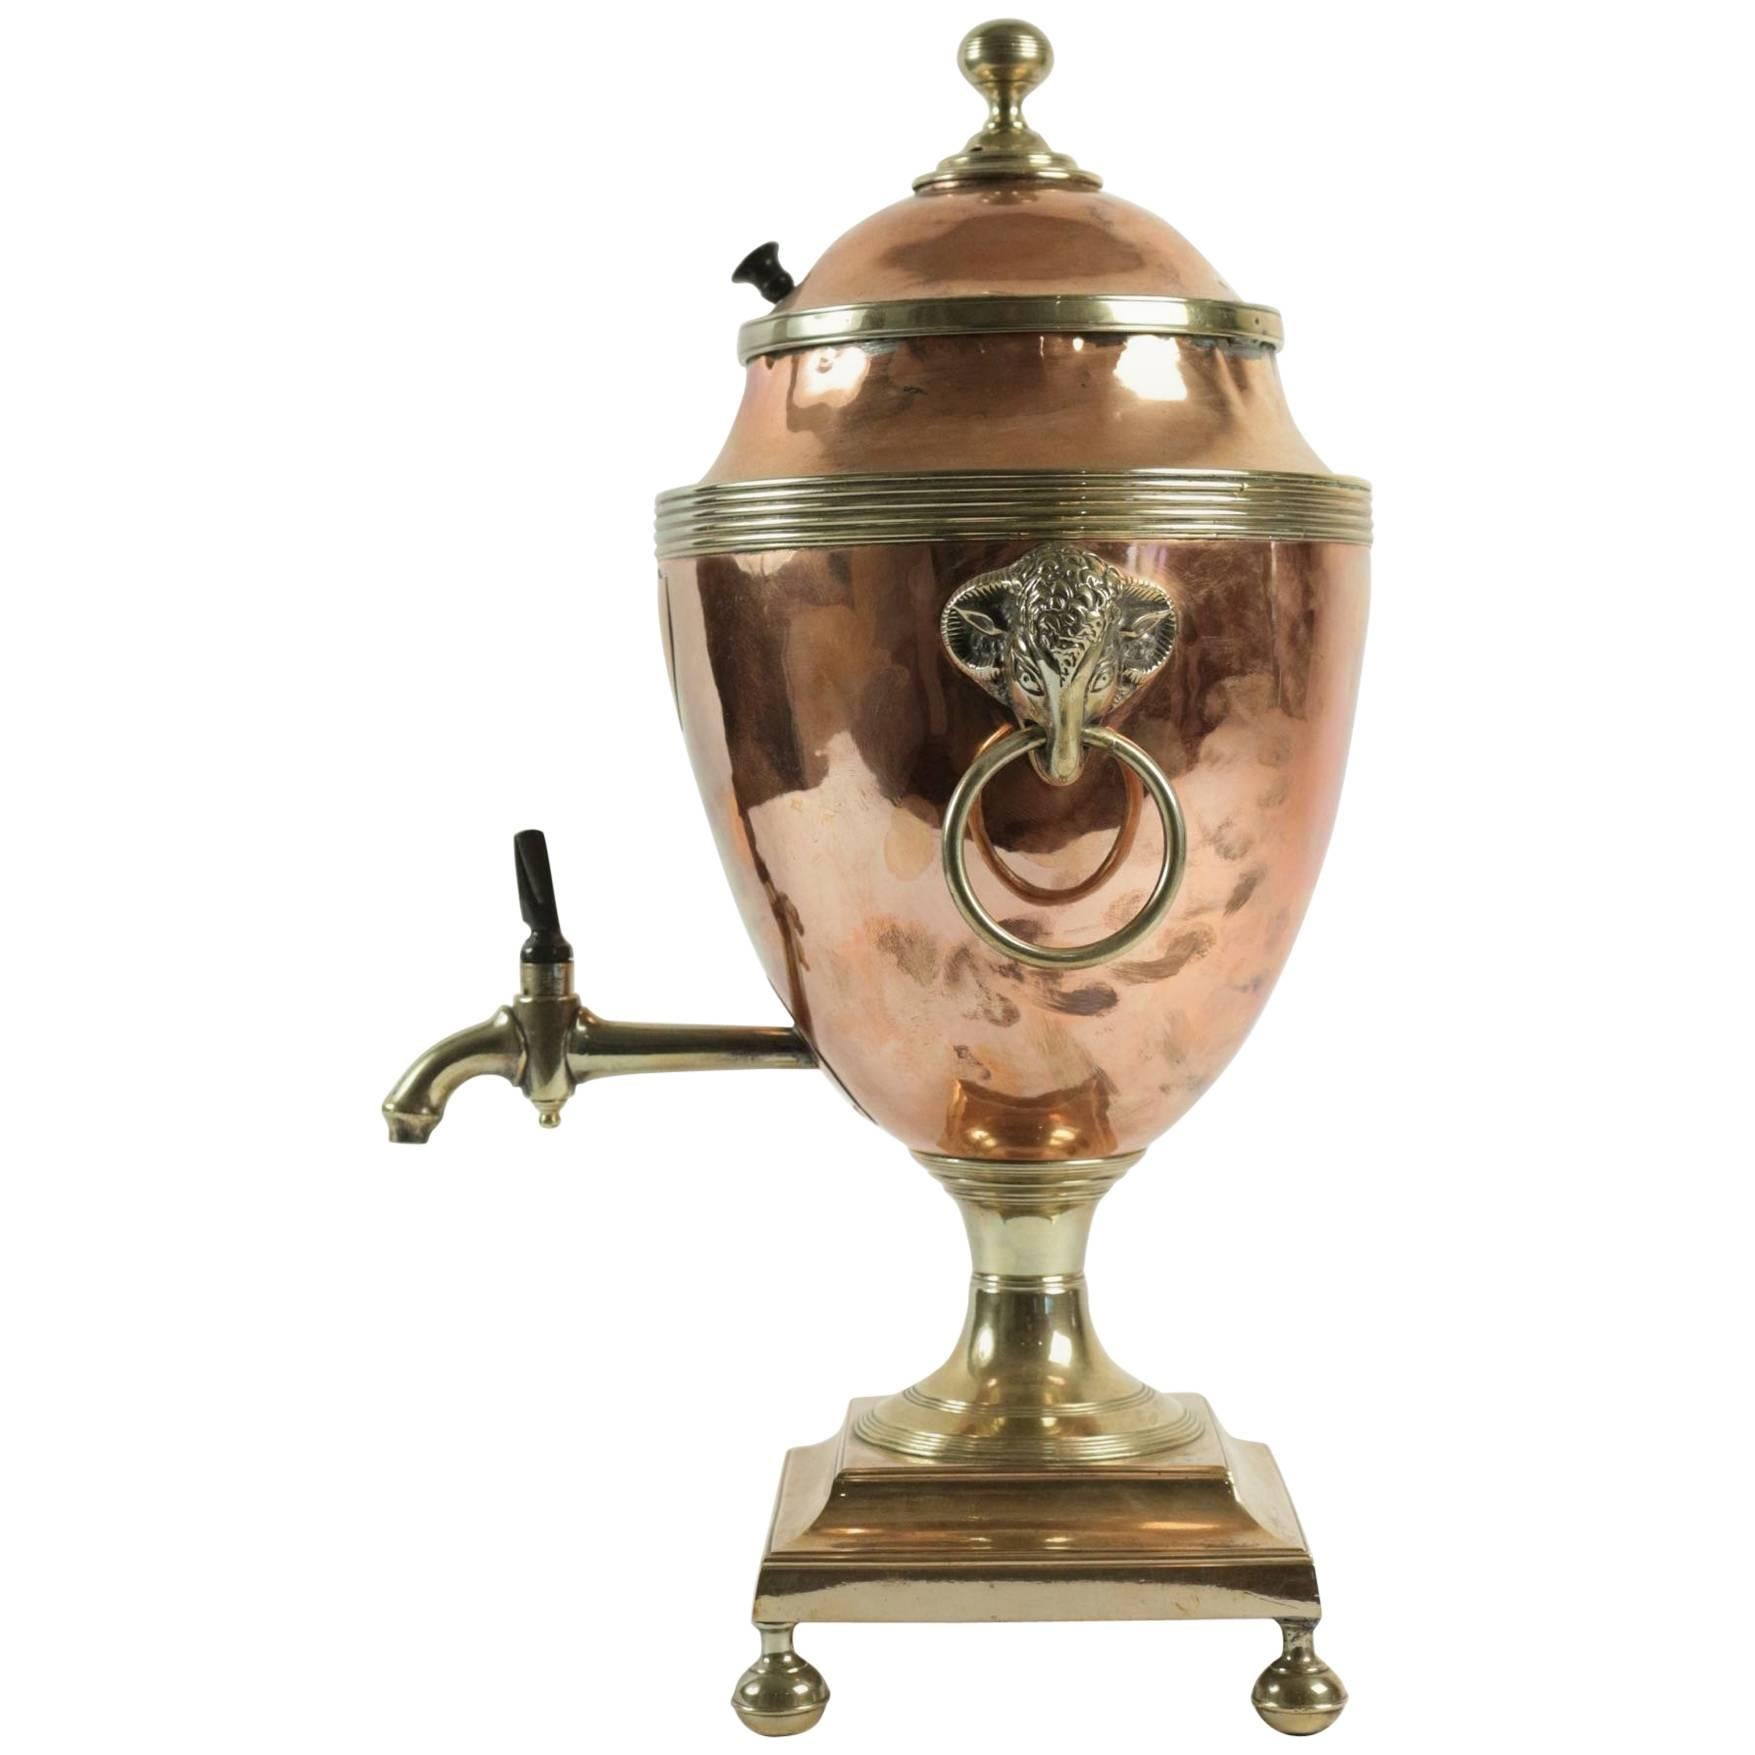 English Water Warmer and Dispenser in Copper and Brass